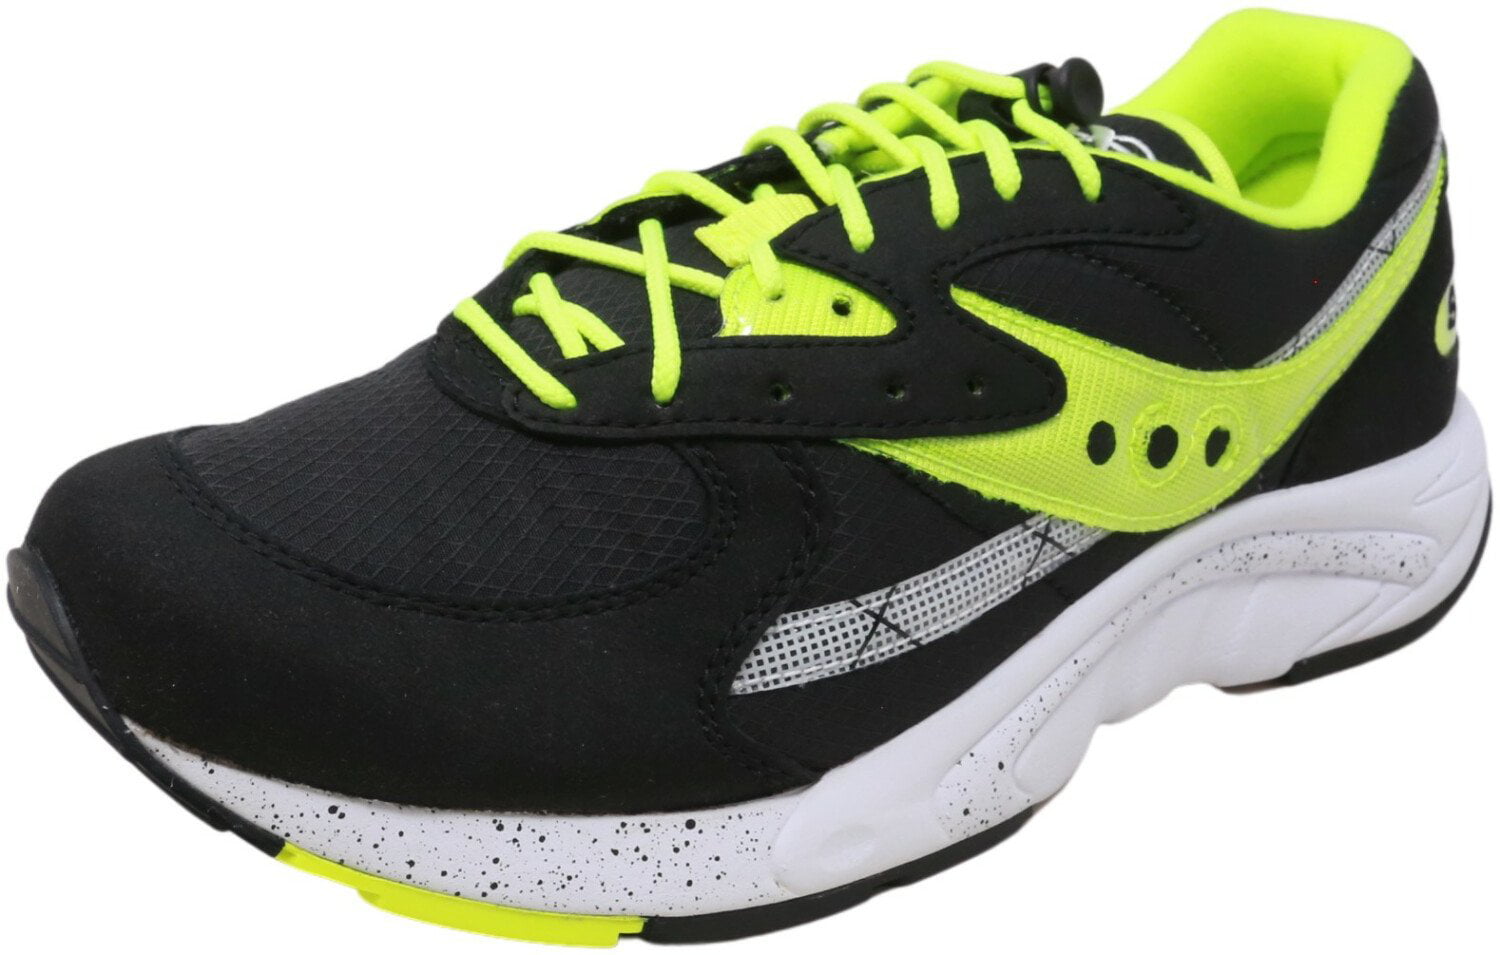 Mens Hi-Tec Synthetic Lace Up Casual Trainers Neon White/Navy & Black.